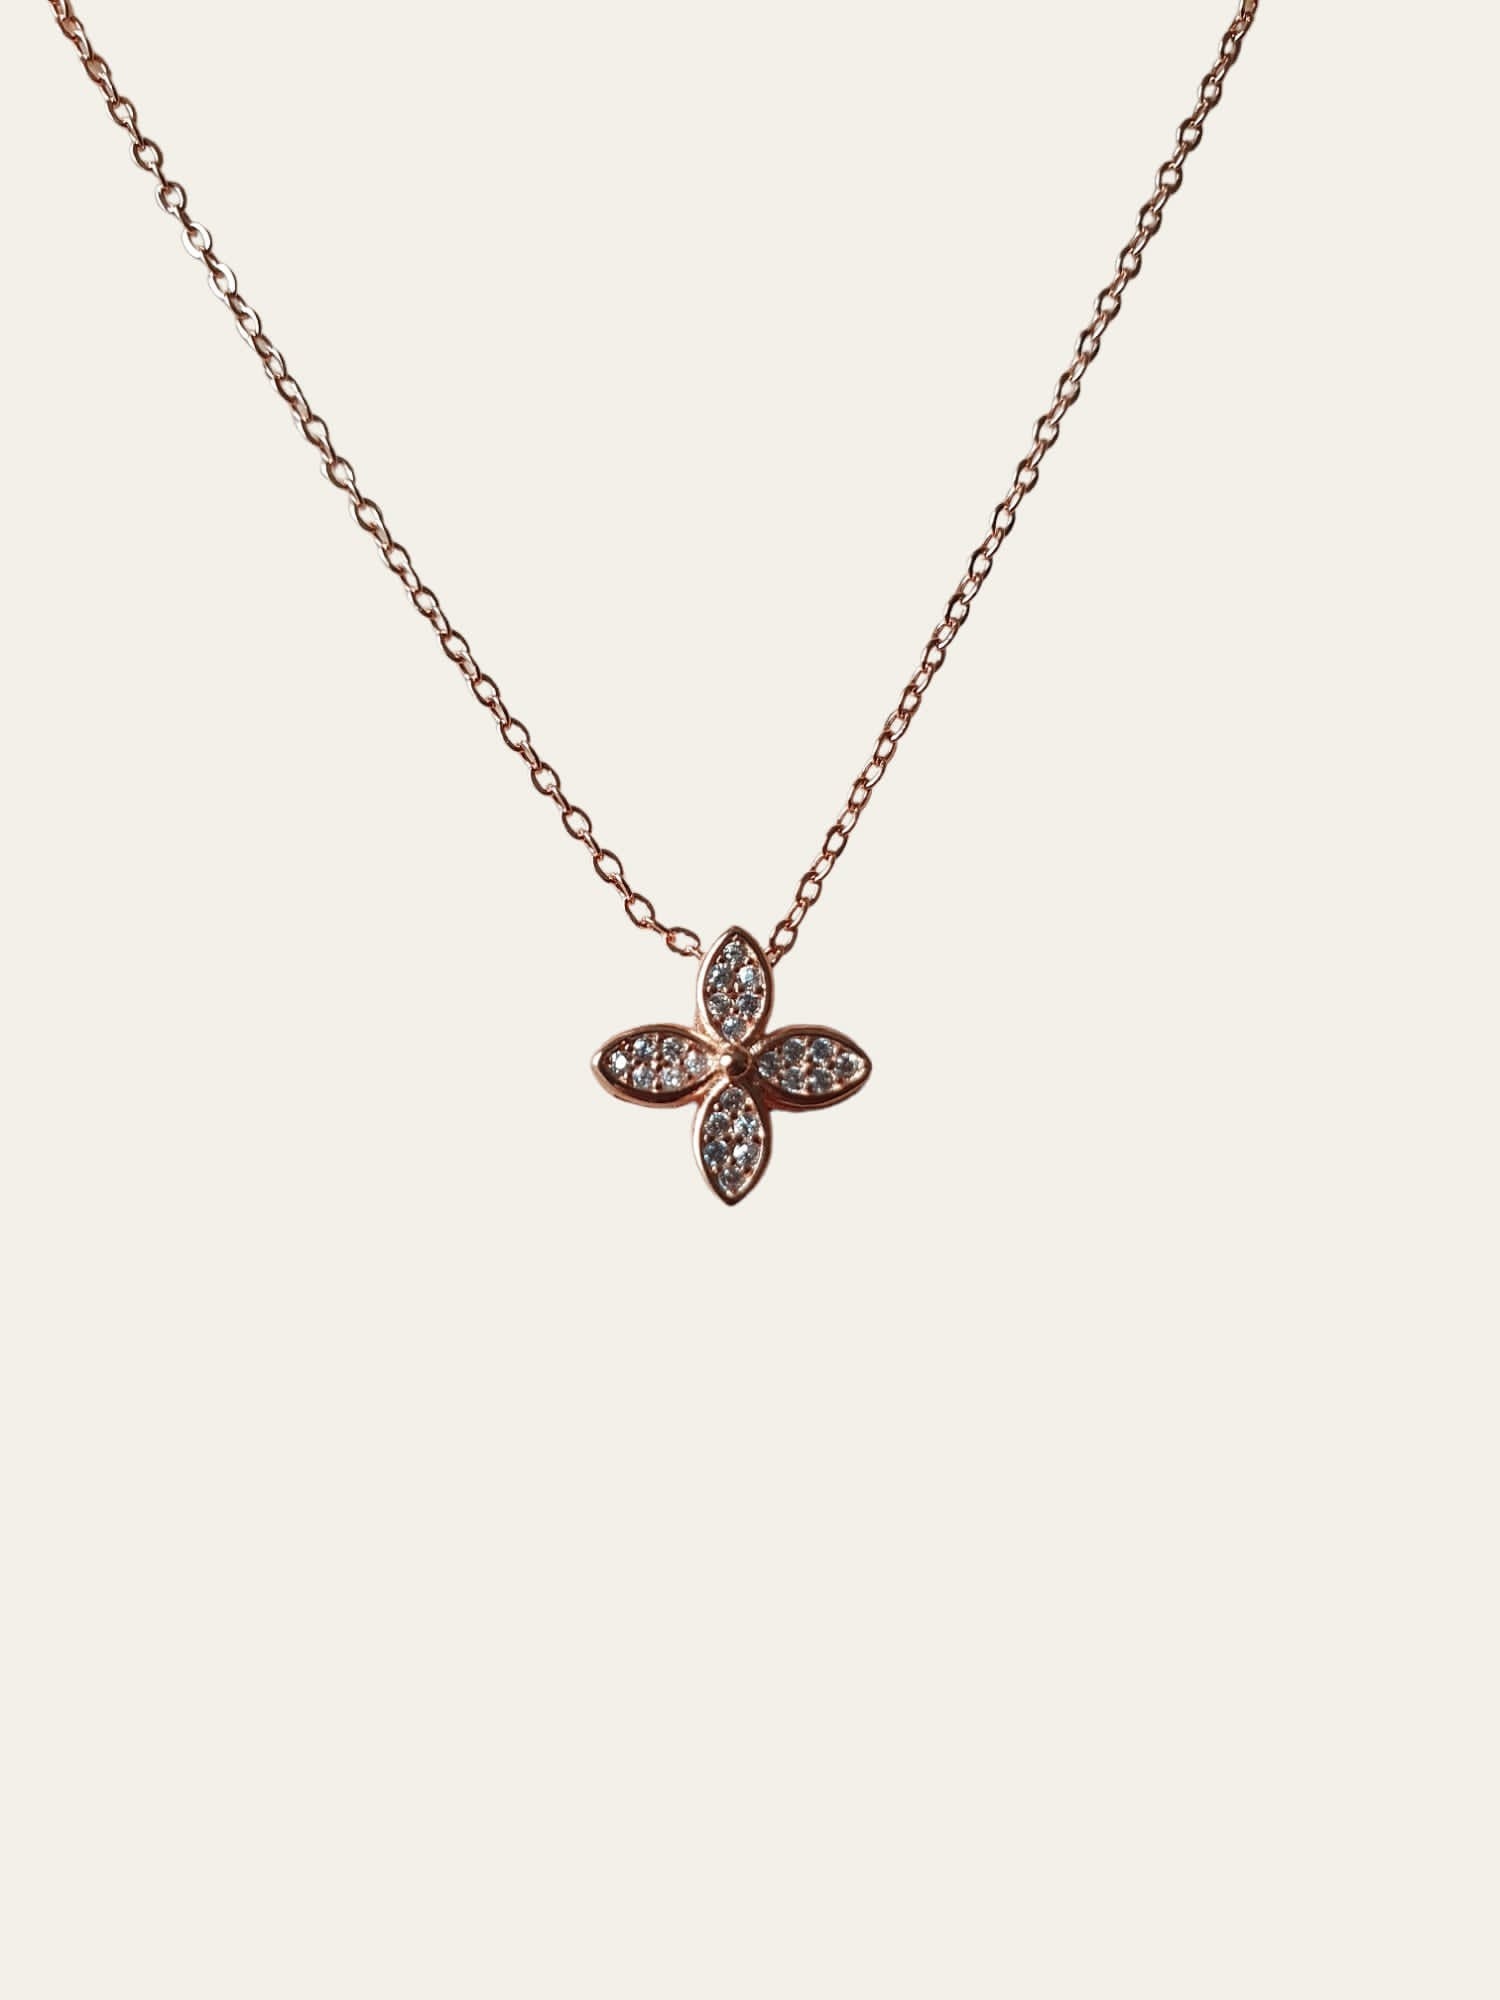 Louis Vuitton Colour Blossom star pendant, pink gold and white